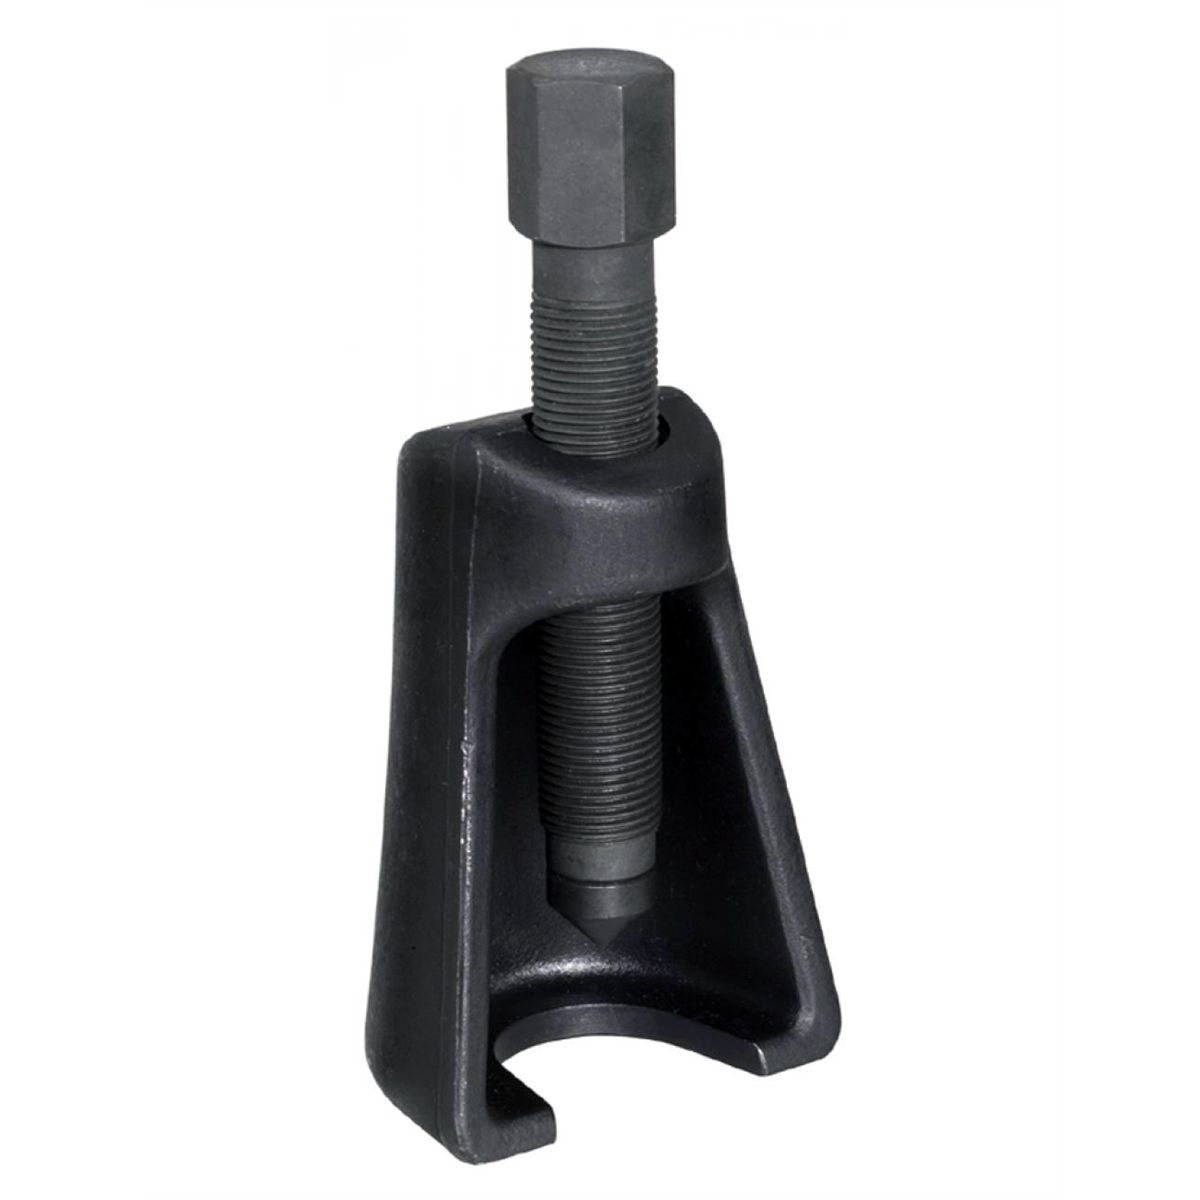 Conical Pitman Arm Puller - Compact & Intermediate Cars